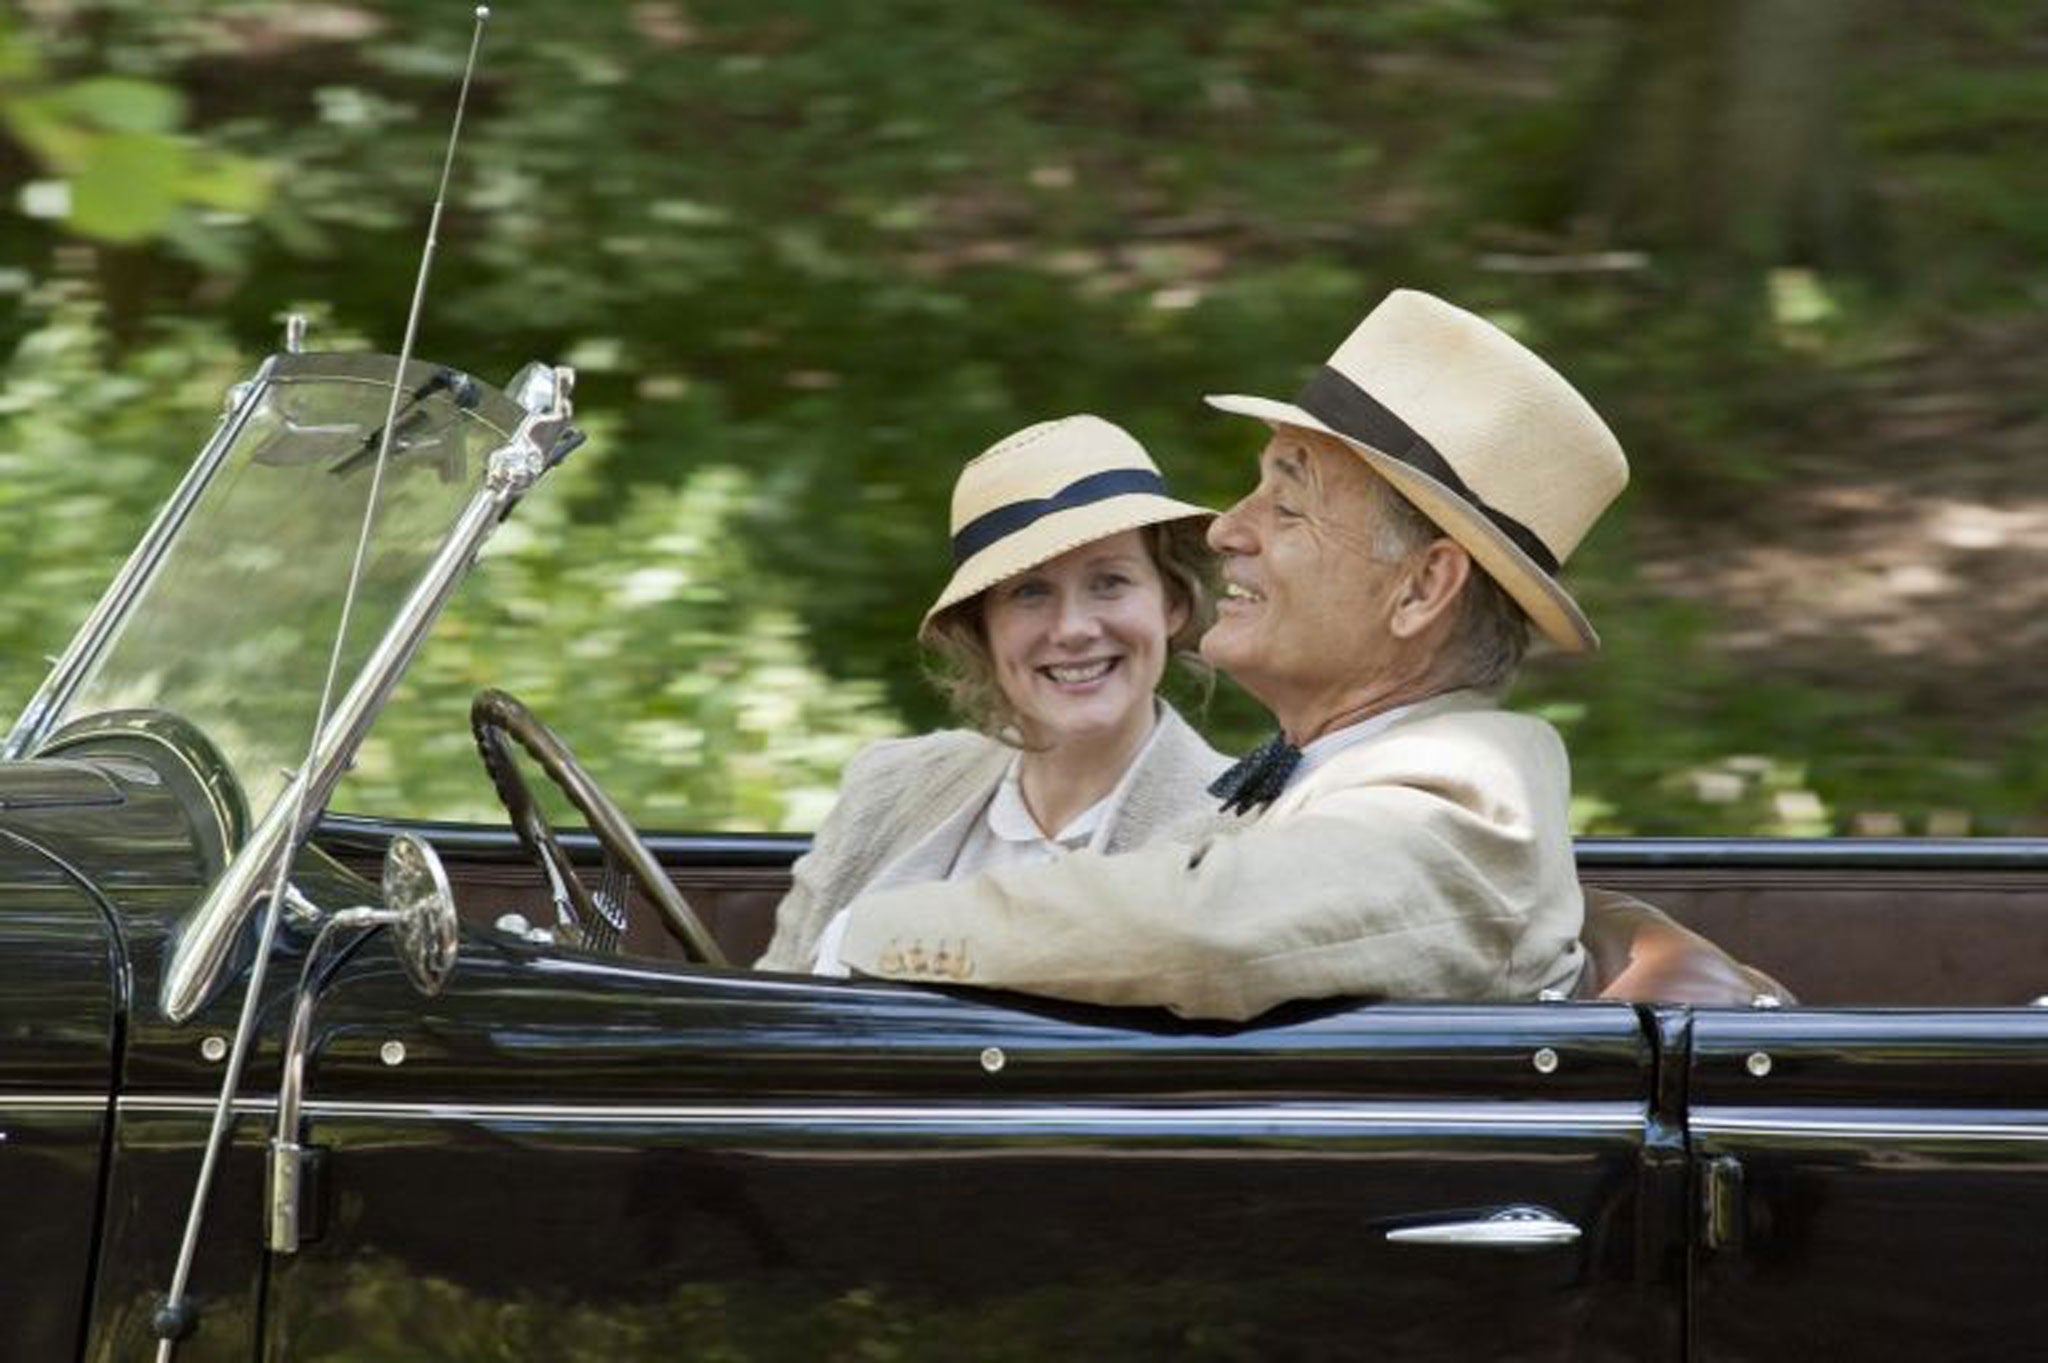 Driving Miss Daisy: Laura Linney and Bill Murray star in the prim drama 'Hyde Park on Hudson'